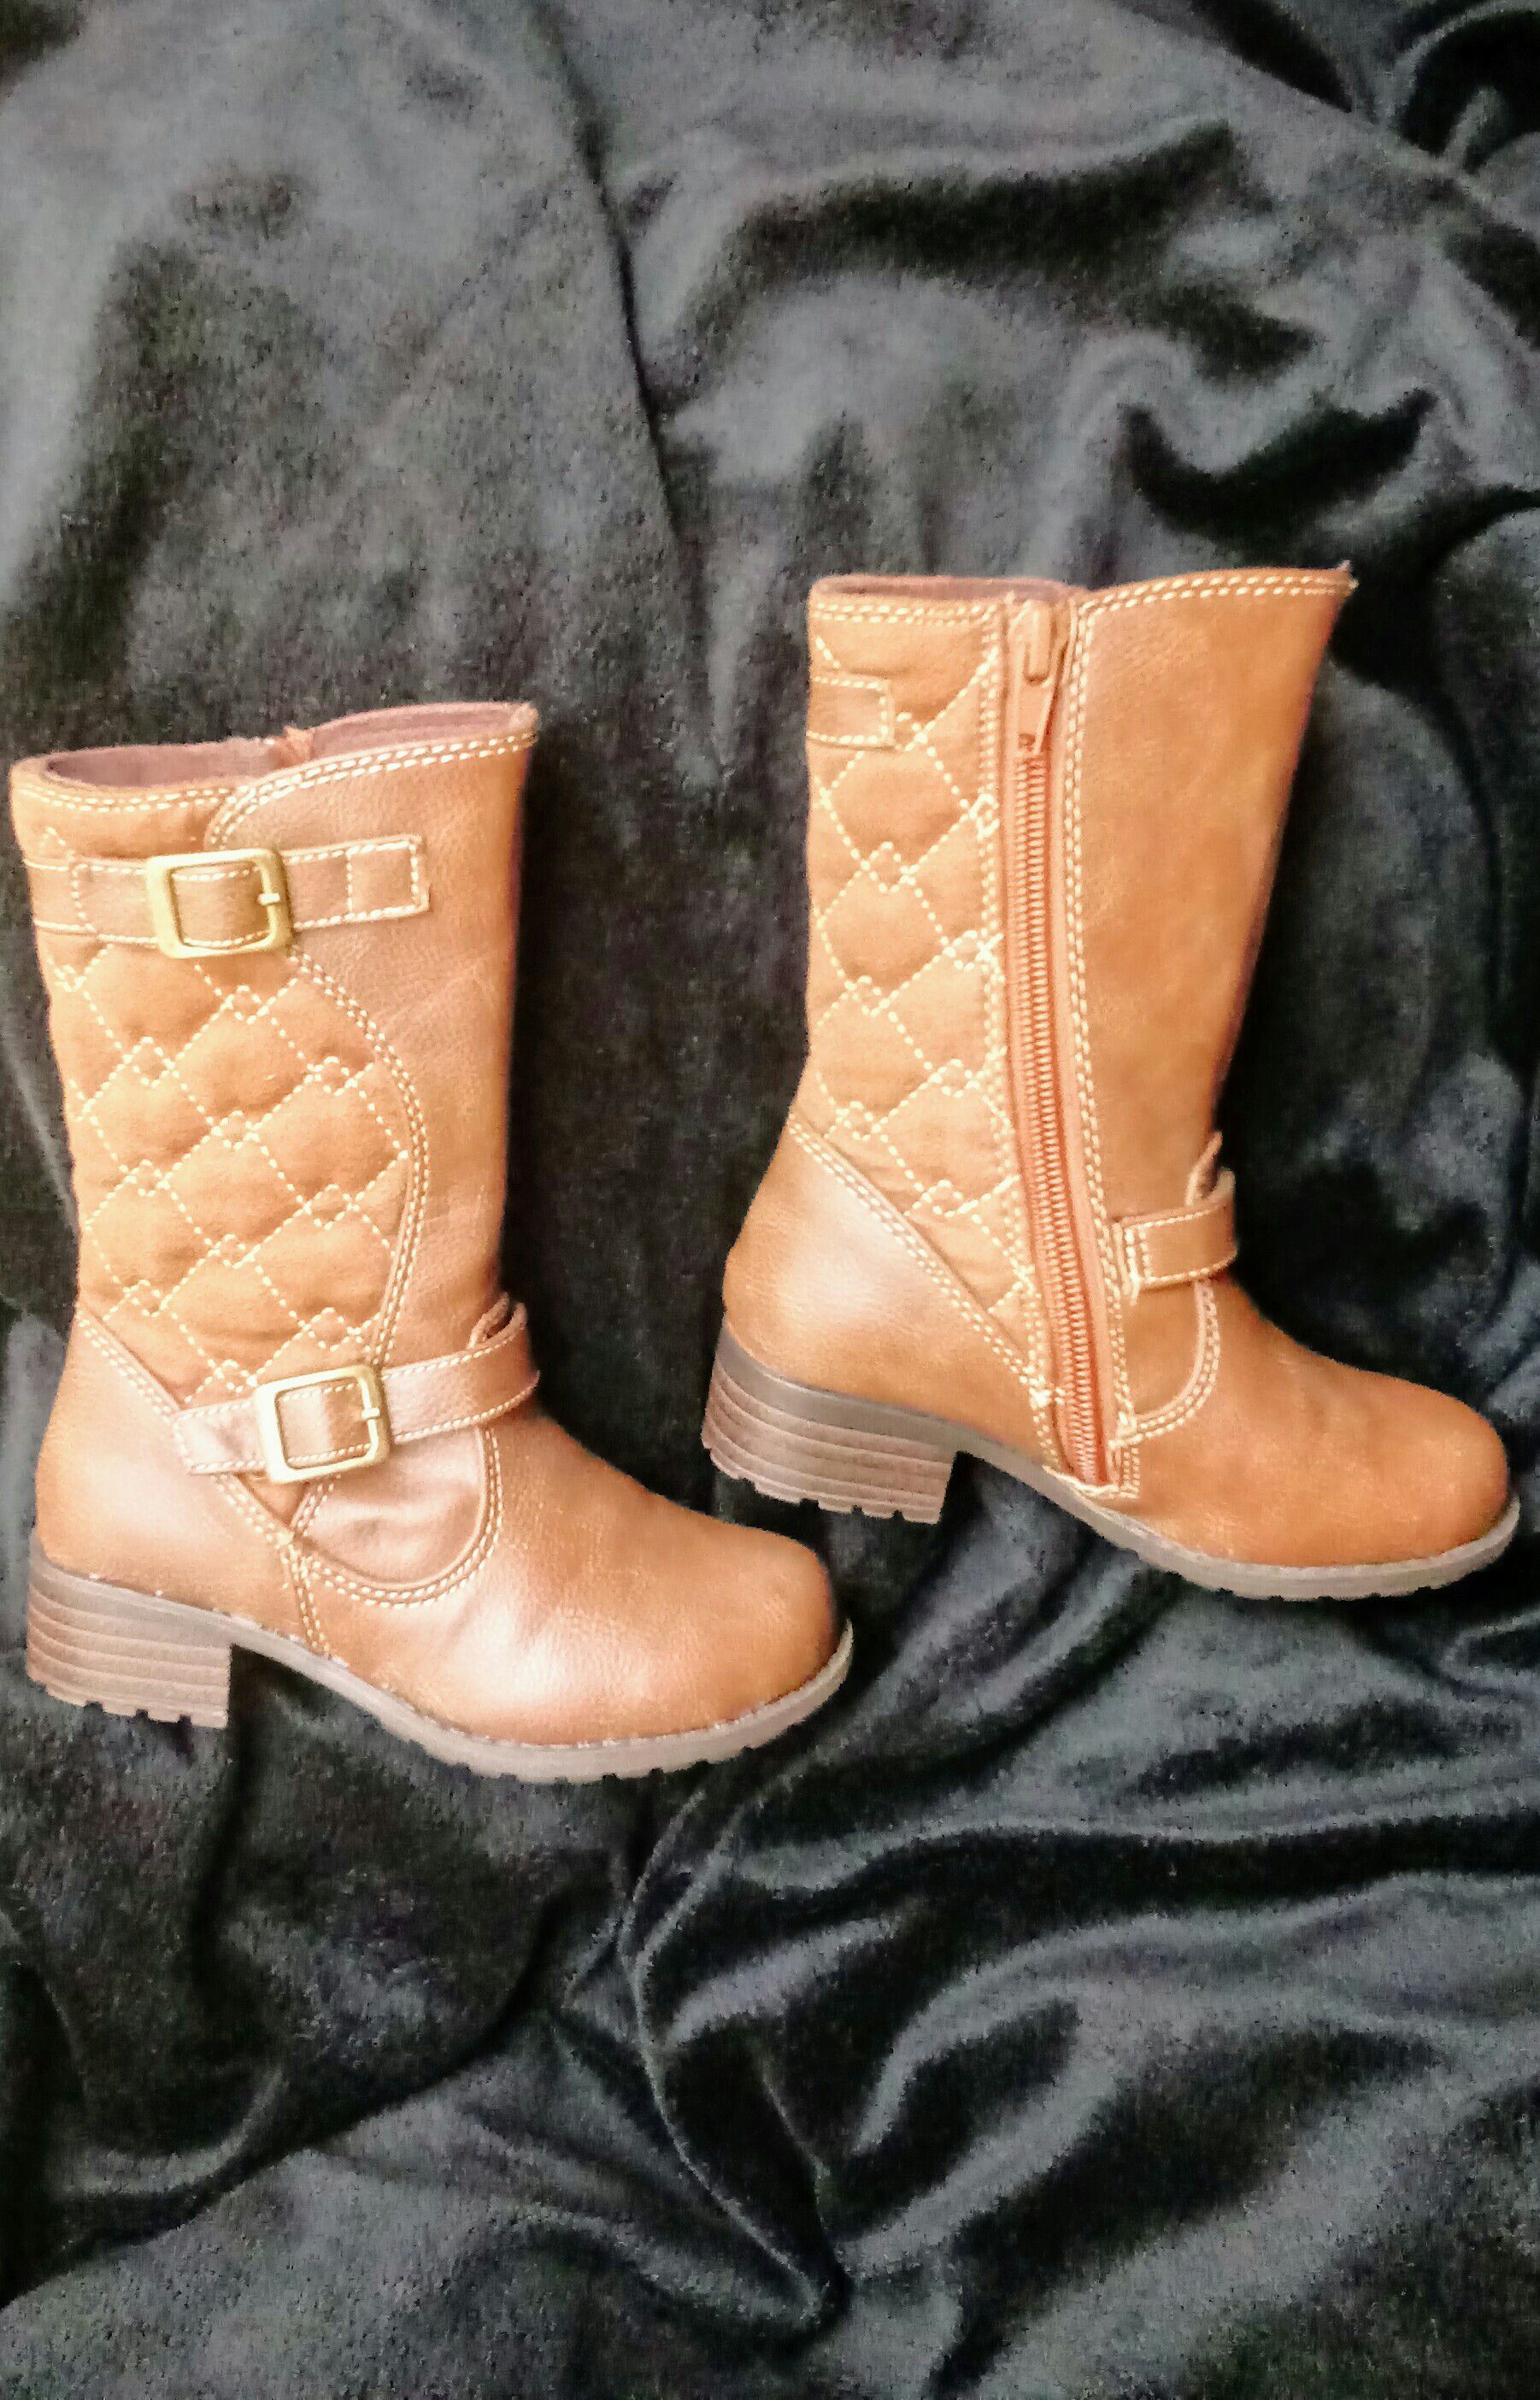 New Girls Toddler Boots Size 8